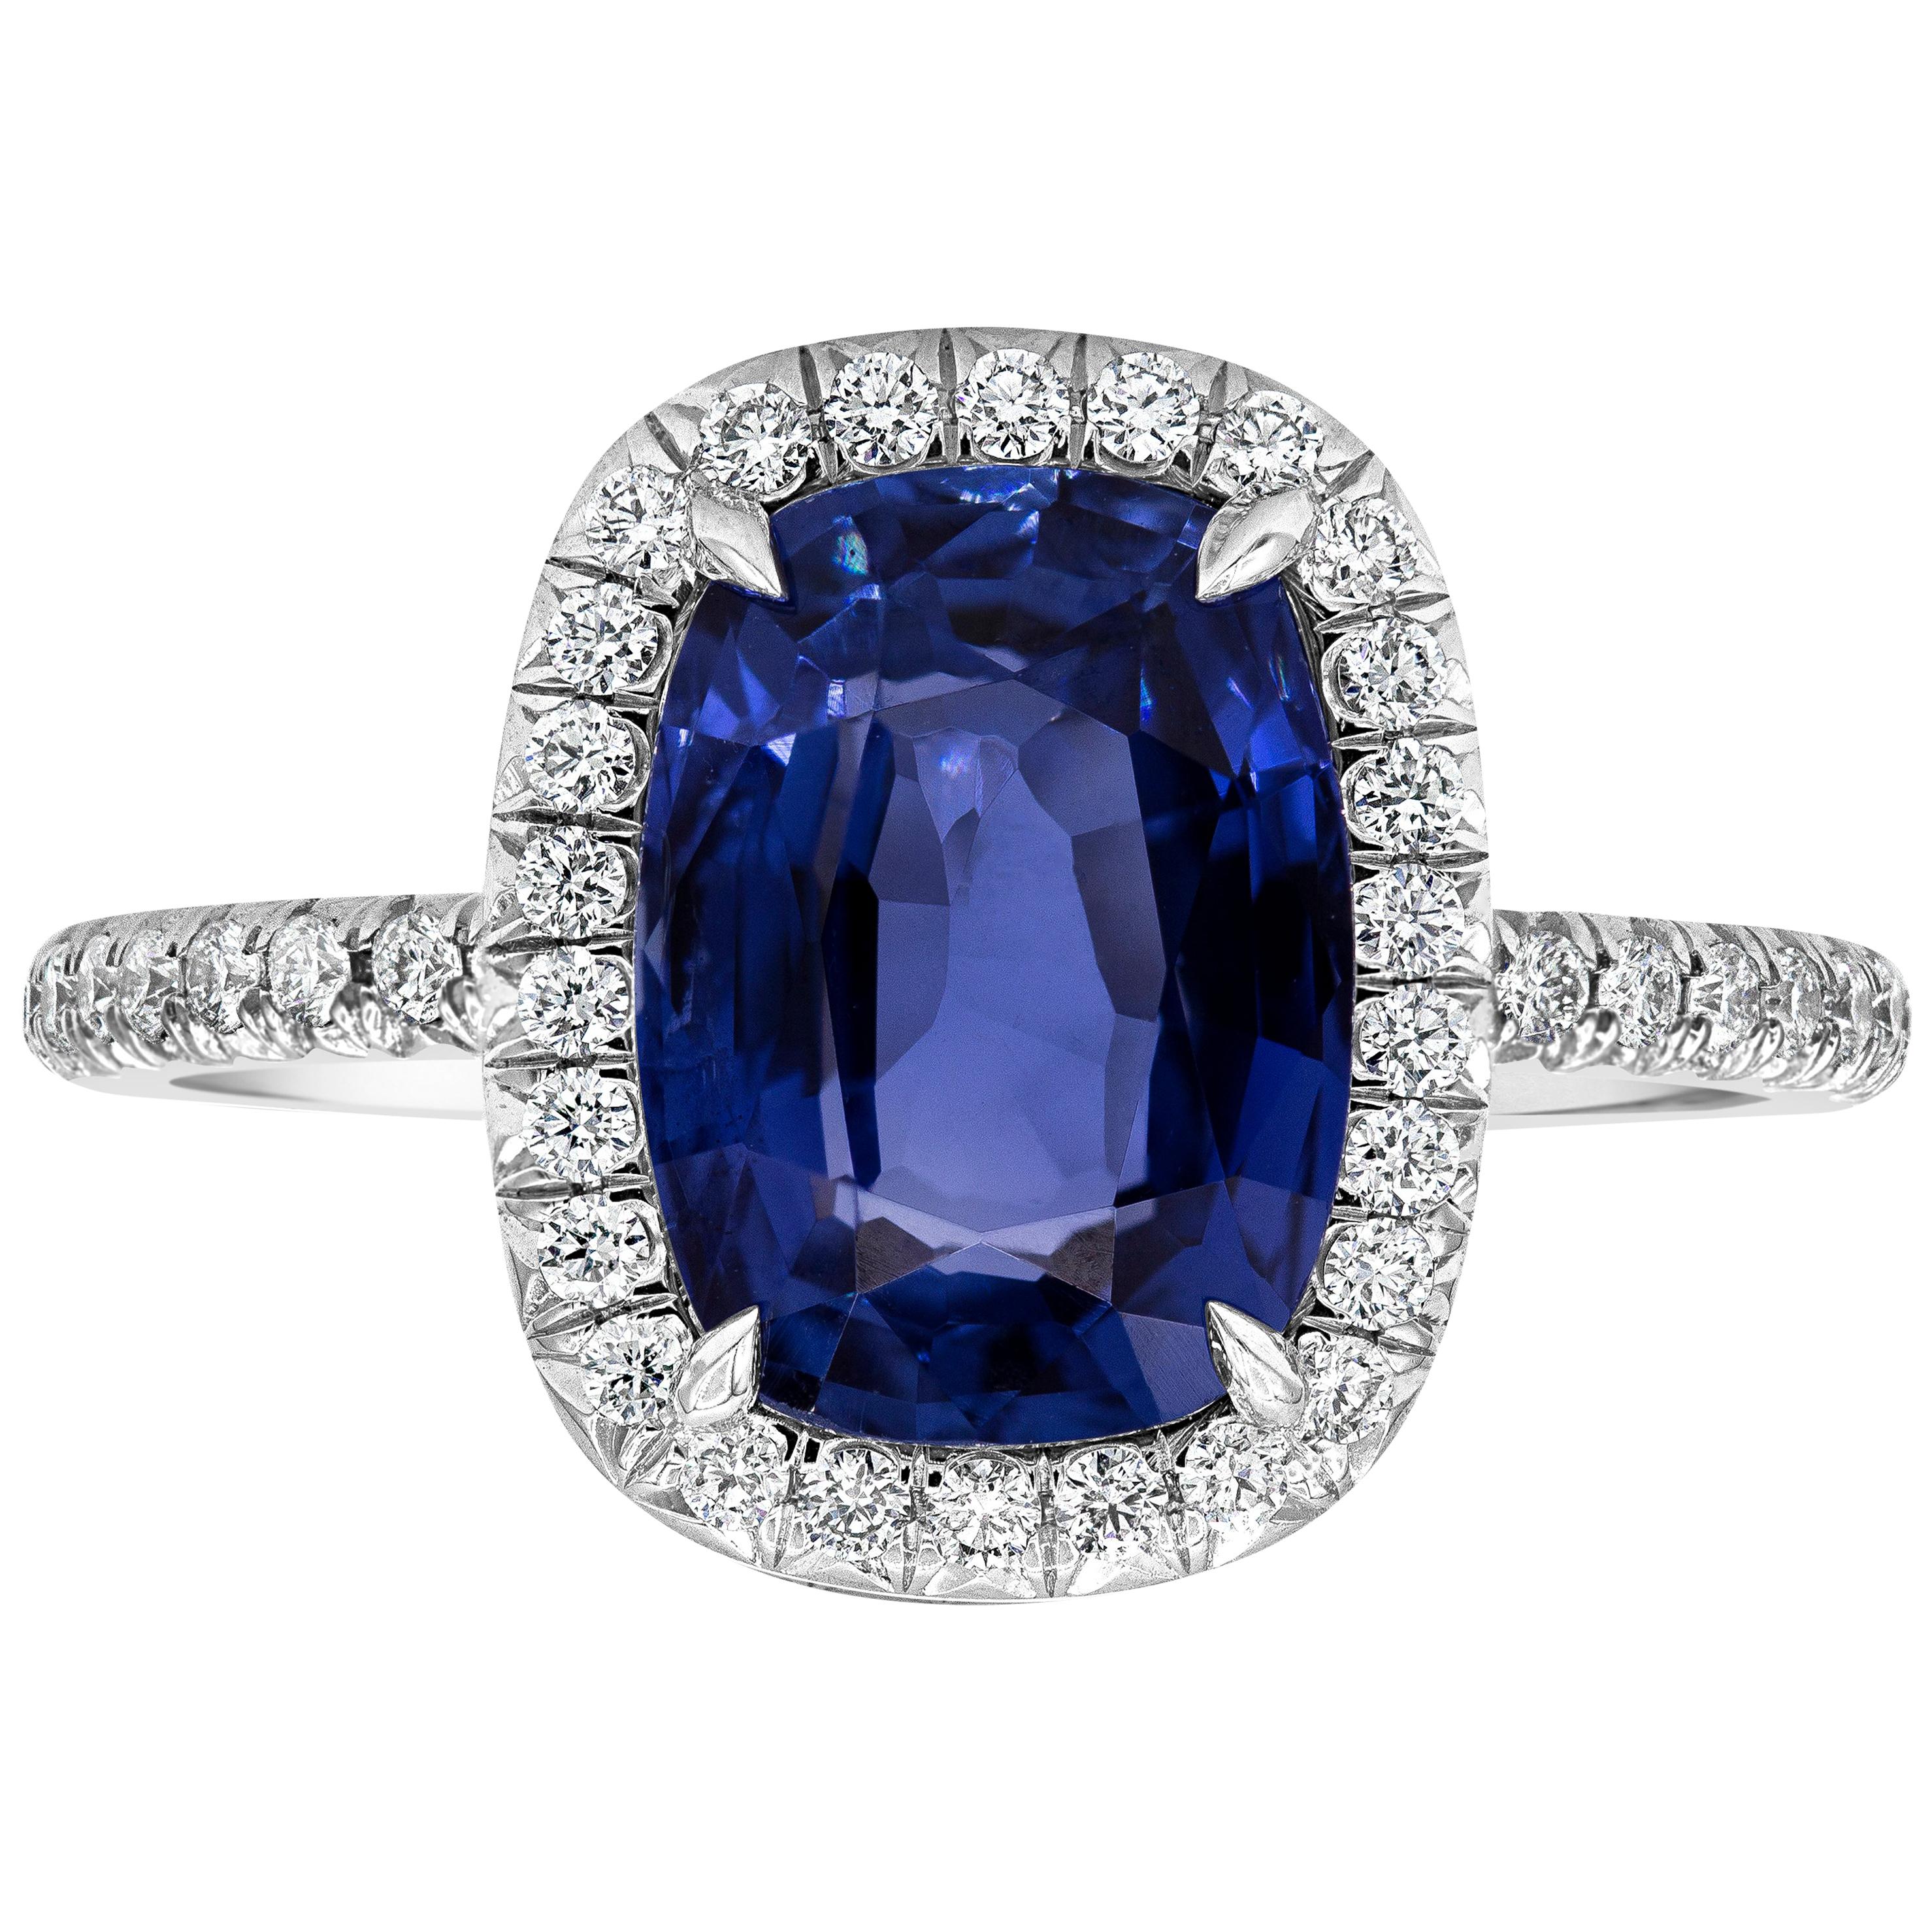 GIA Certified 3.37 Carats Cushion Cut Sapphire with Diamond Halo Engagement Ring For Sale